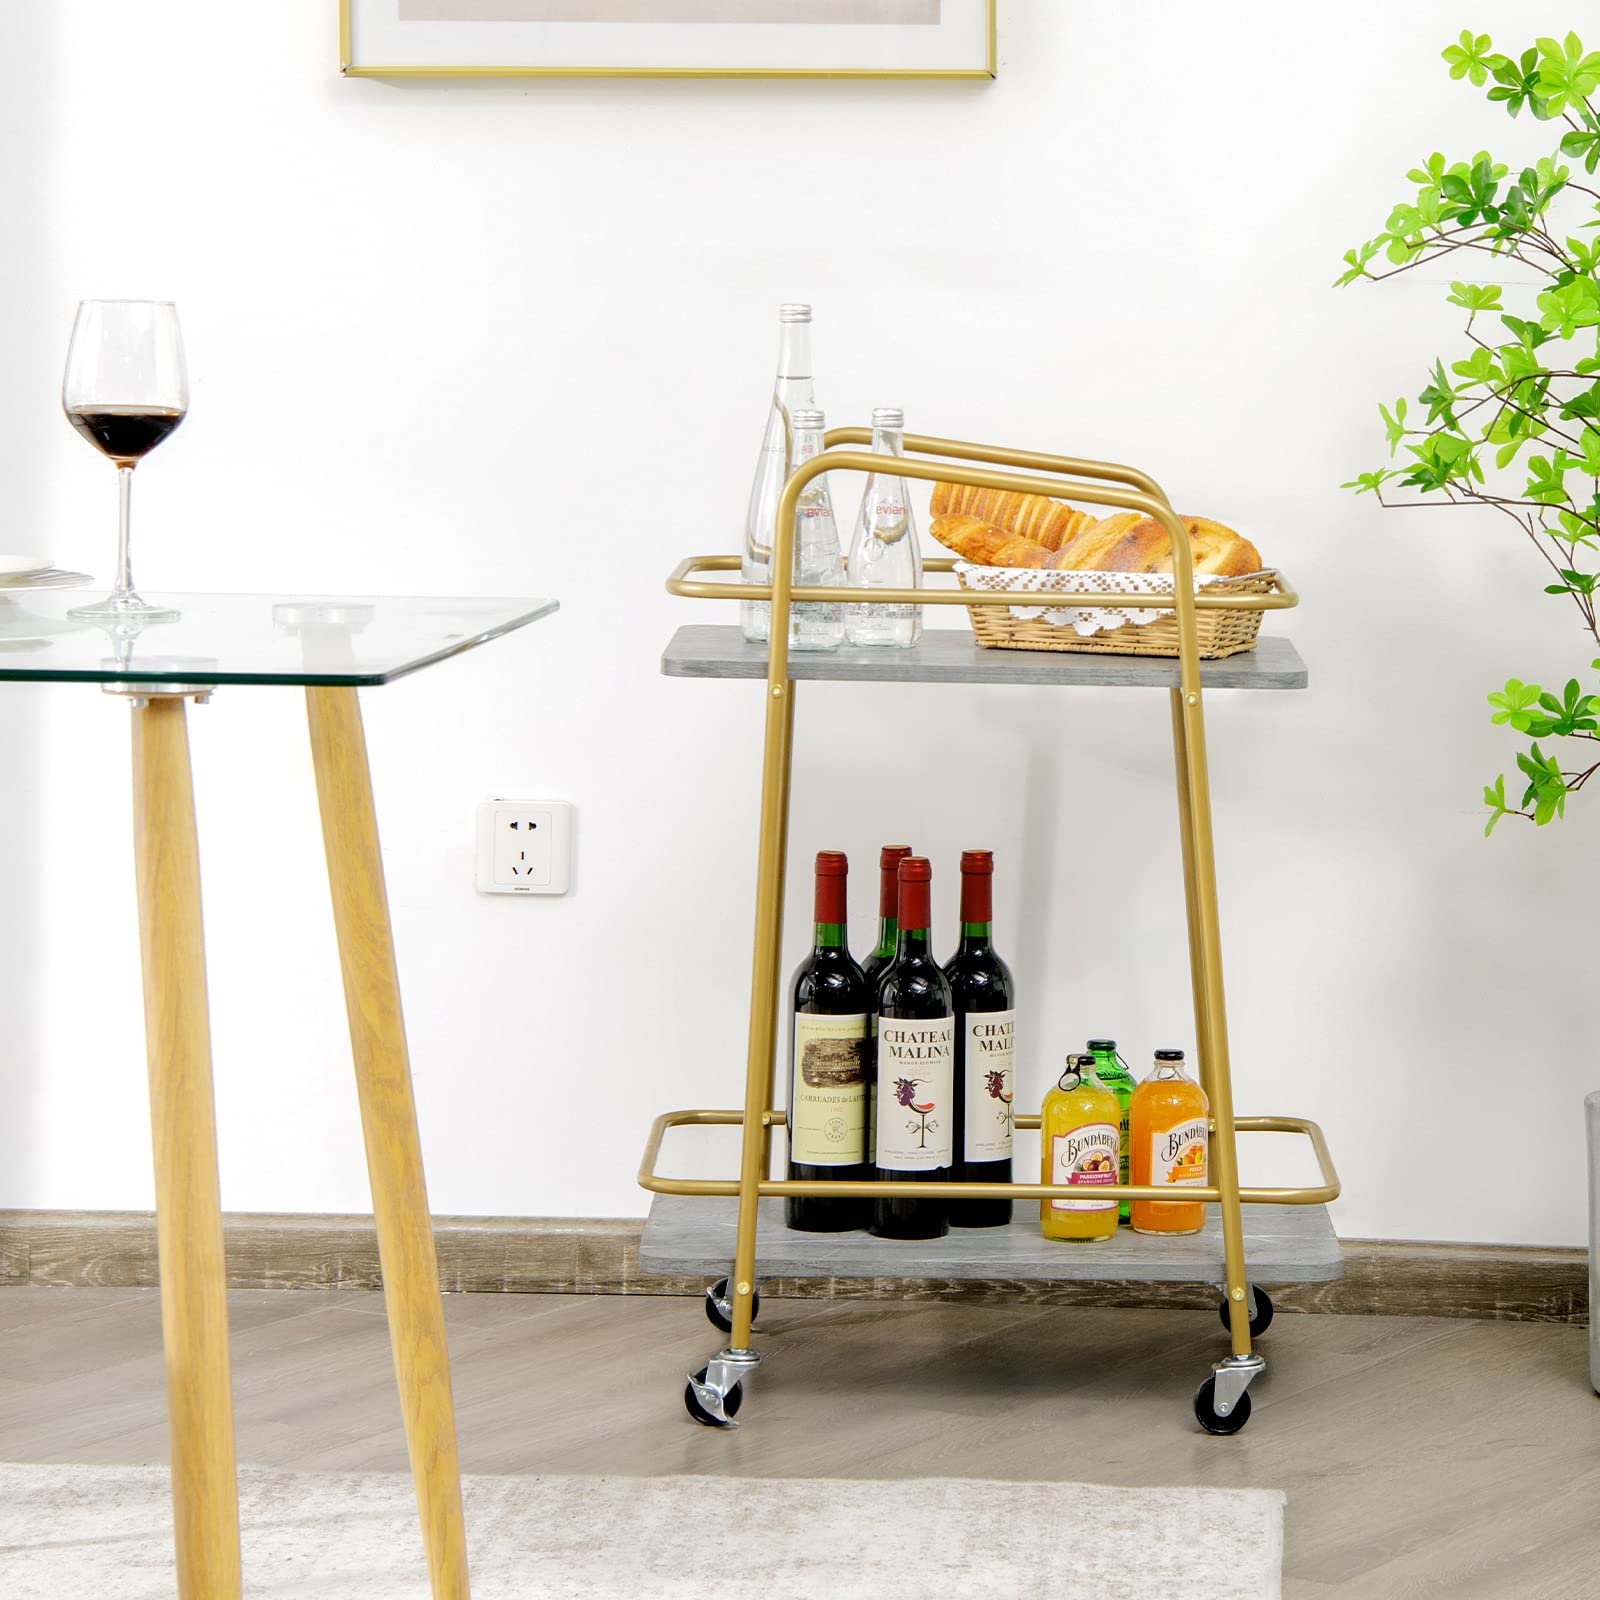 Giantex Gold Bar Cart, Island Service Cart, 2 Tier Storage Shelves with Guardrail for Dining Room Wine Coffee Bar